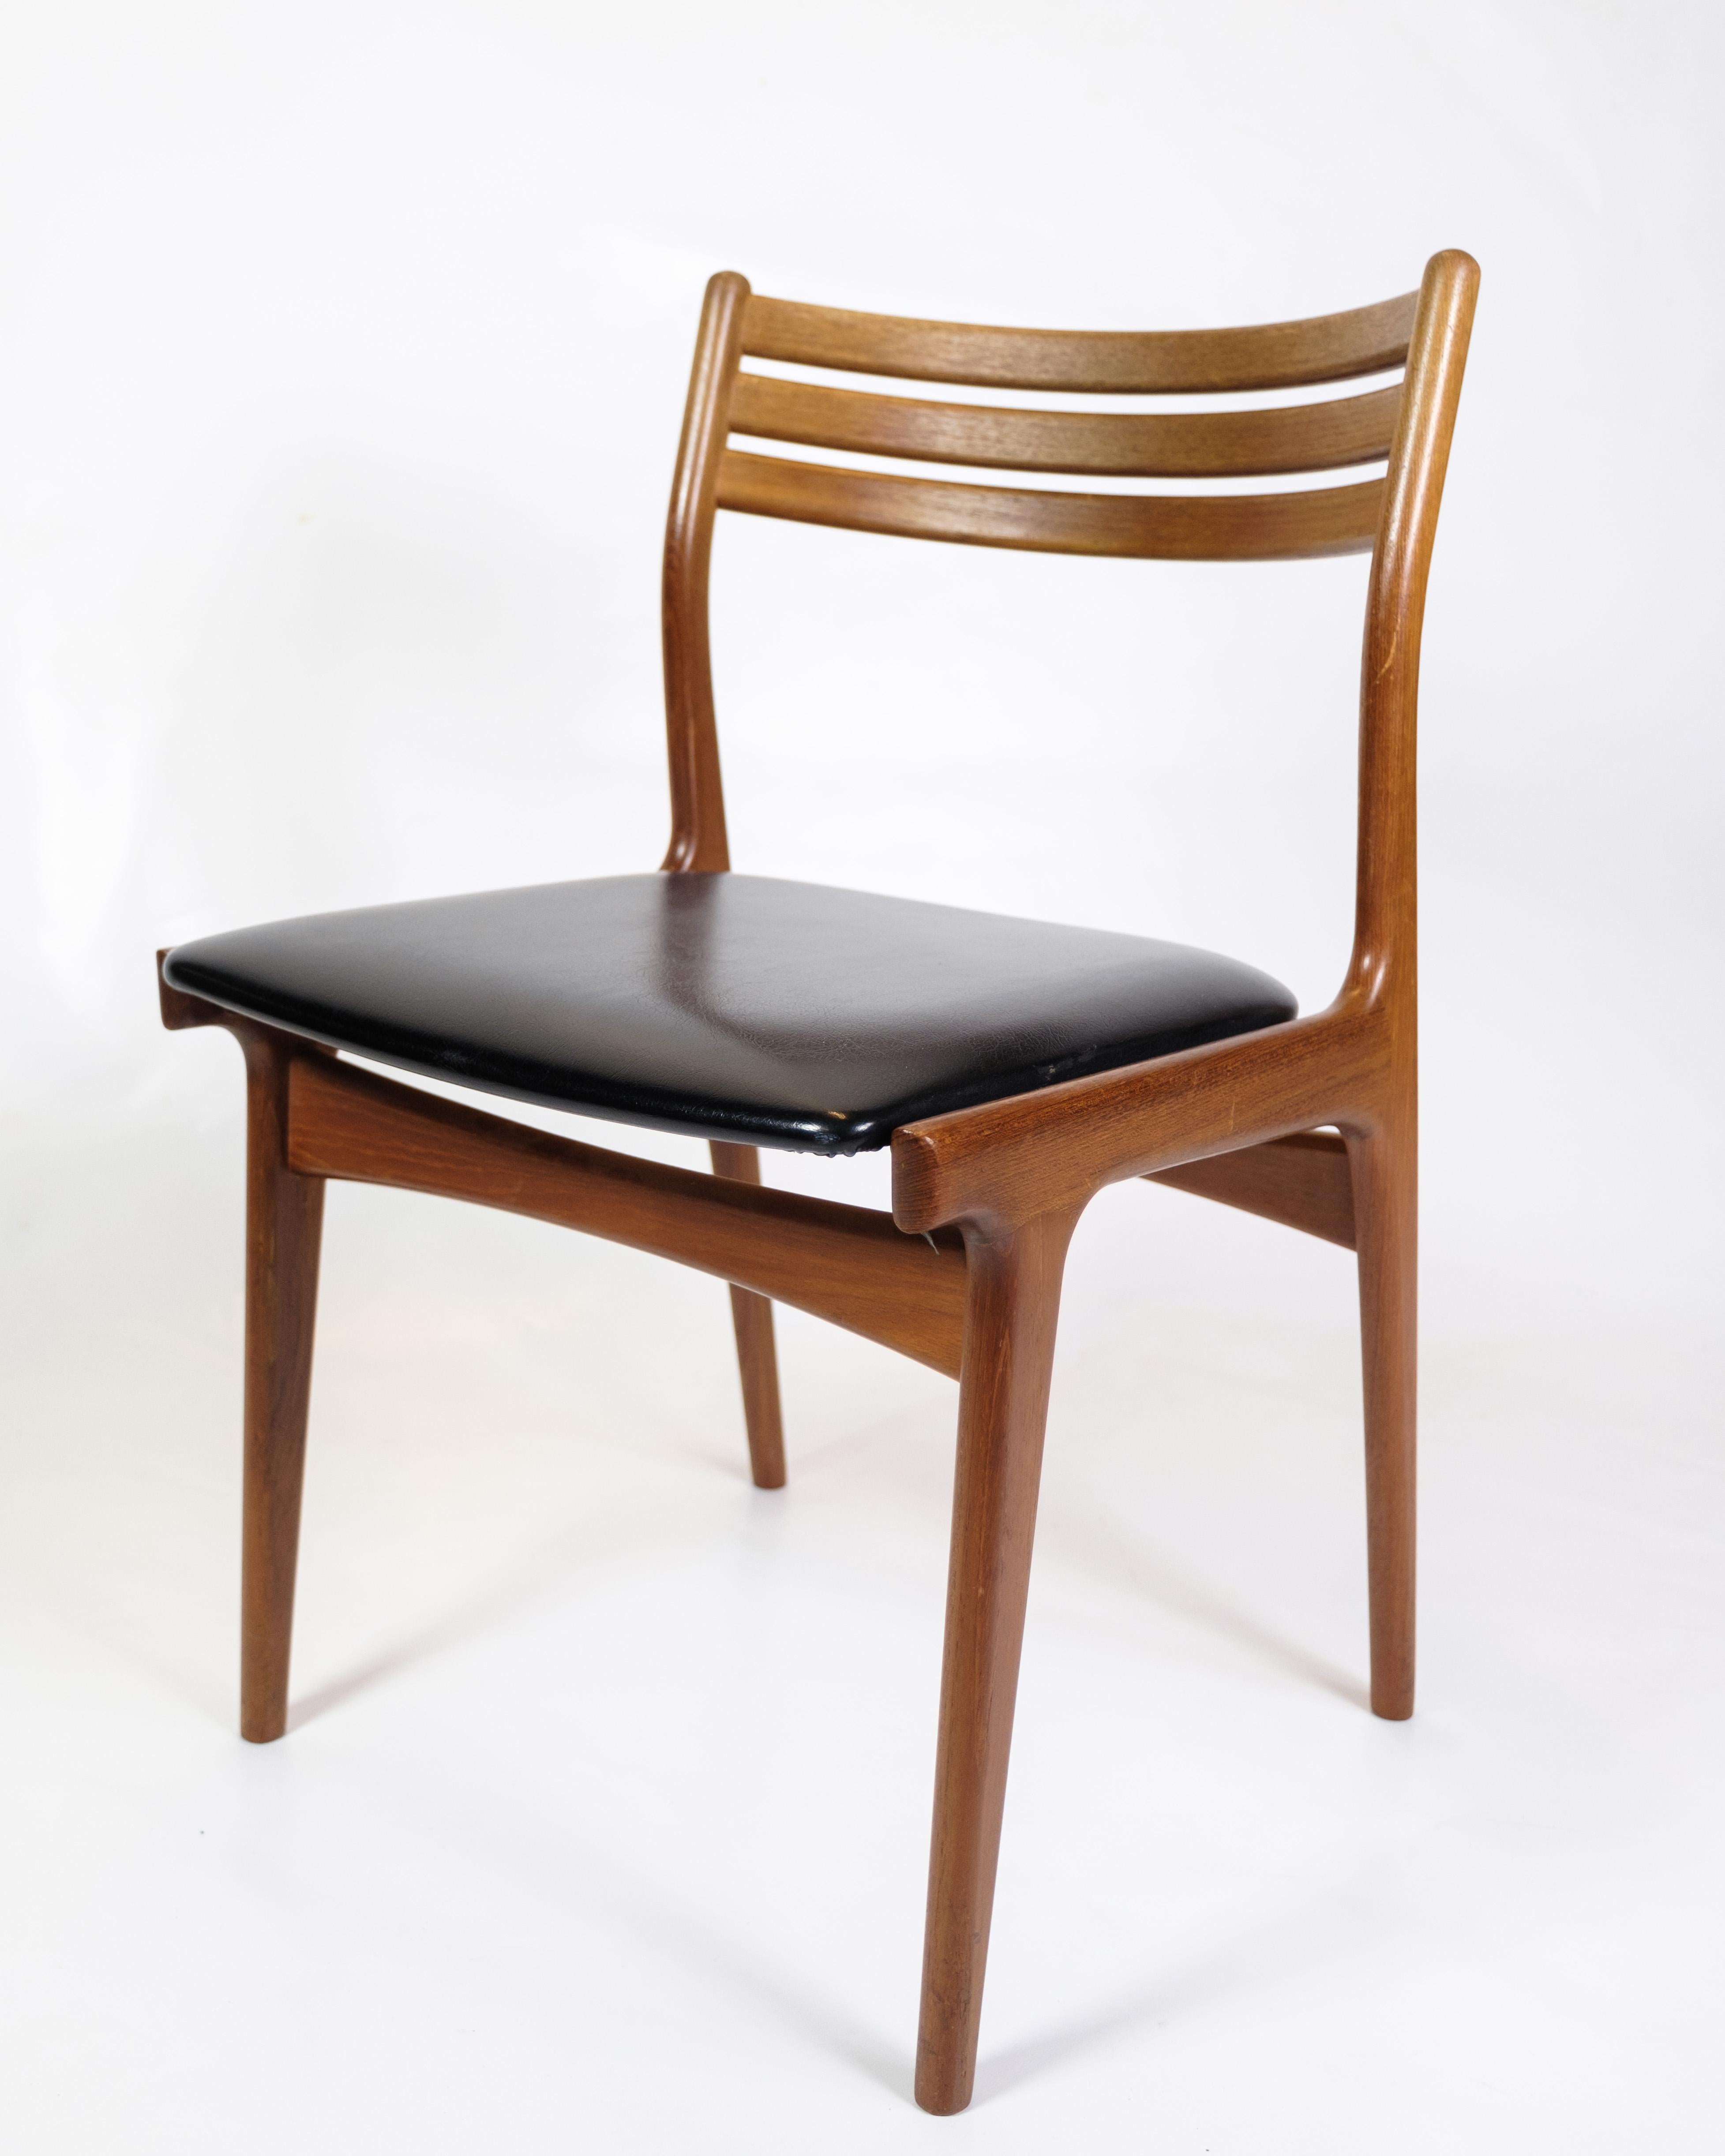 Danish Set Of 6 Dining Room Chairs Model U20 Made In Teak By Johannes Andersen 1960s For Sale